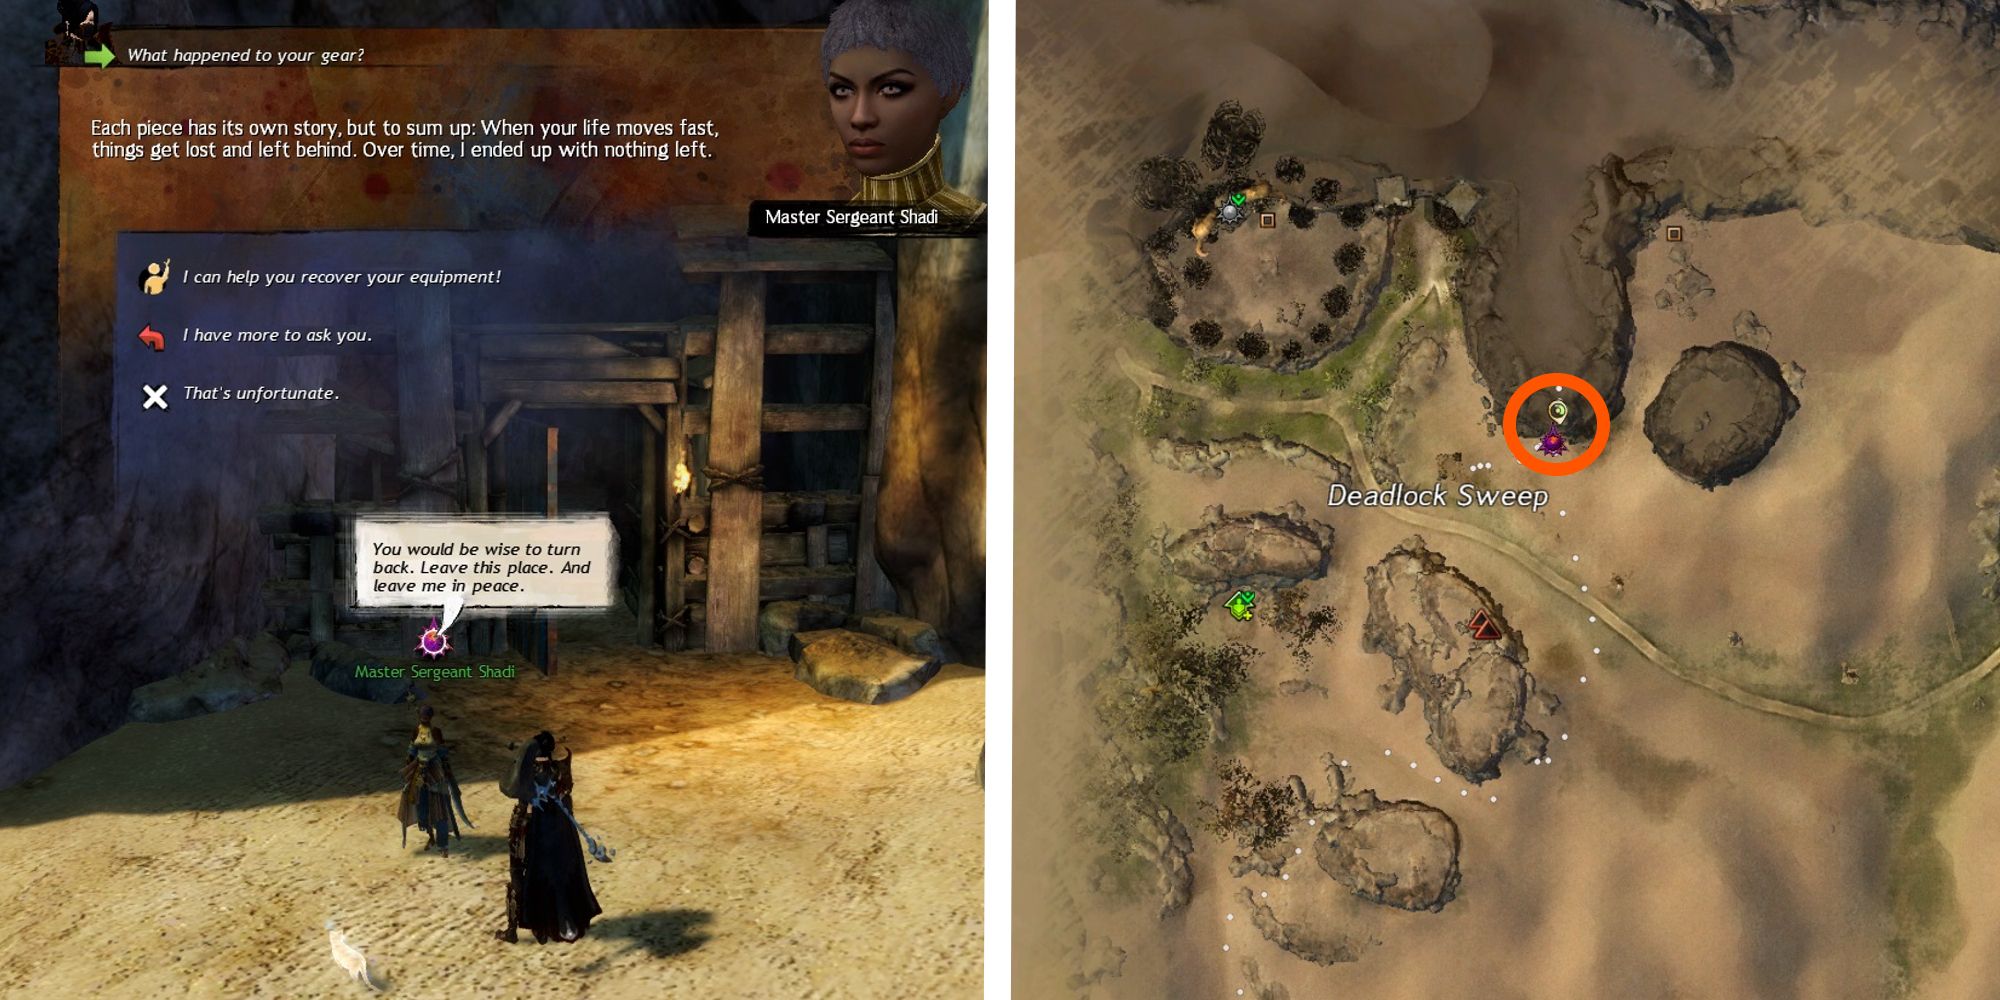 image of player talking to shadi, next to image of shadis location on map